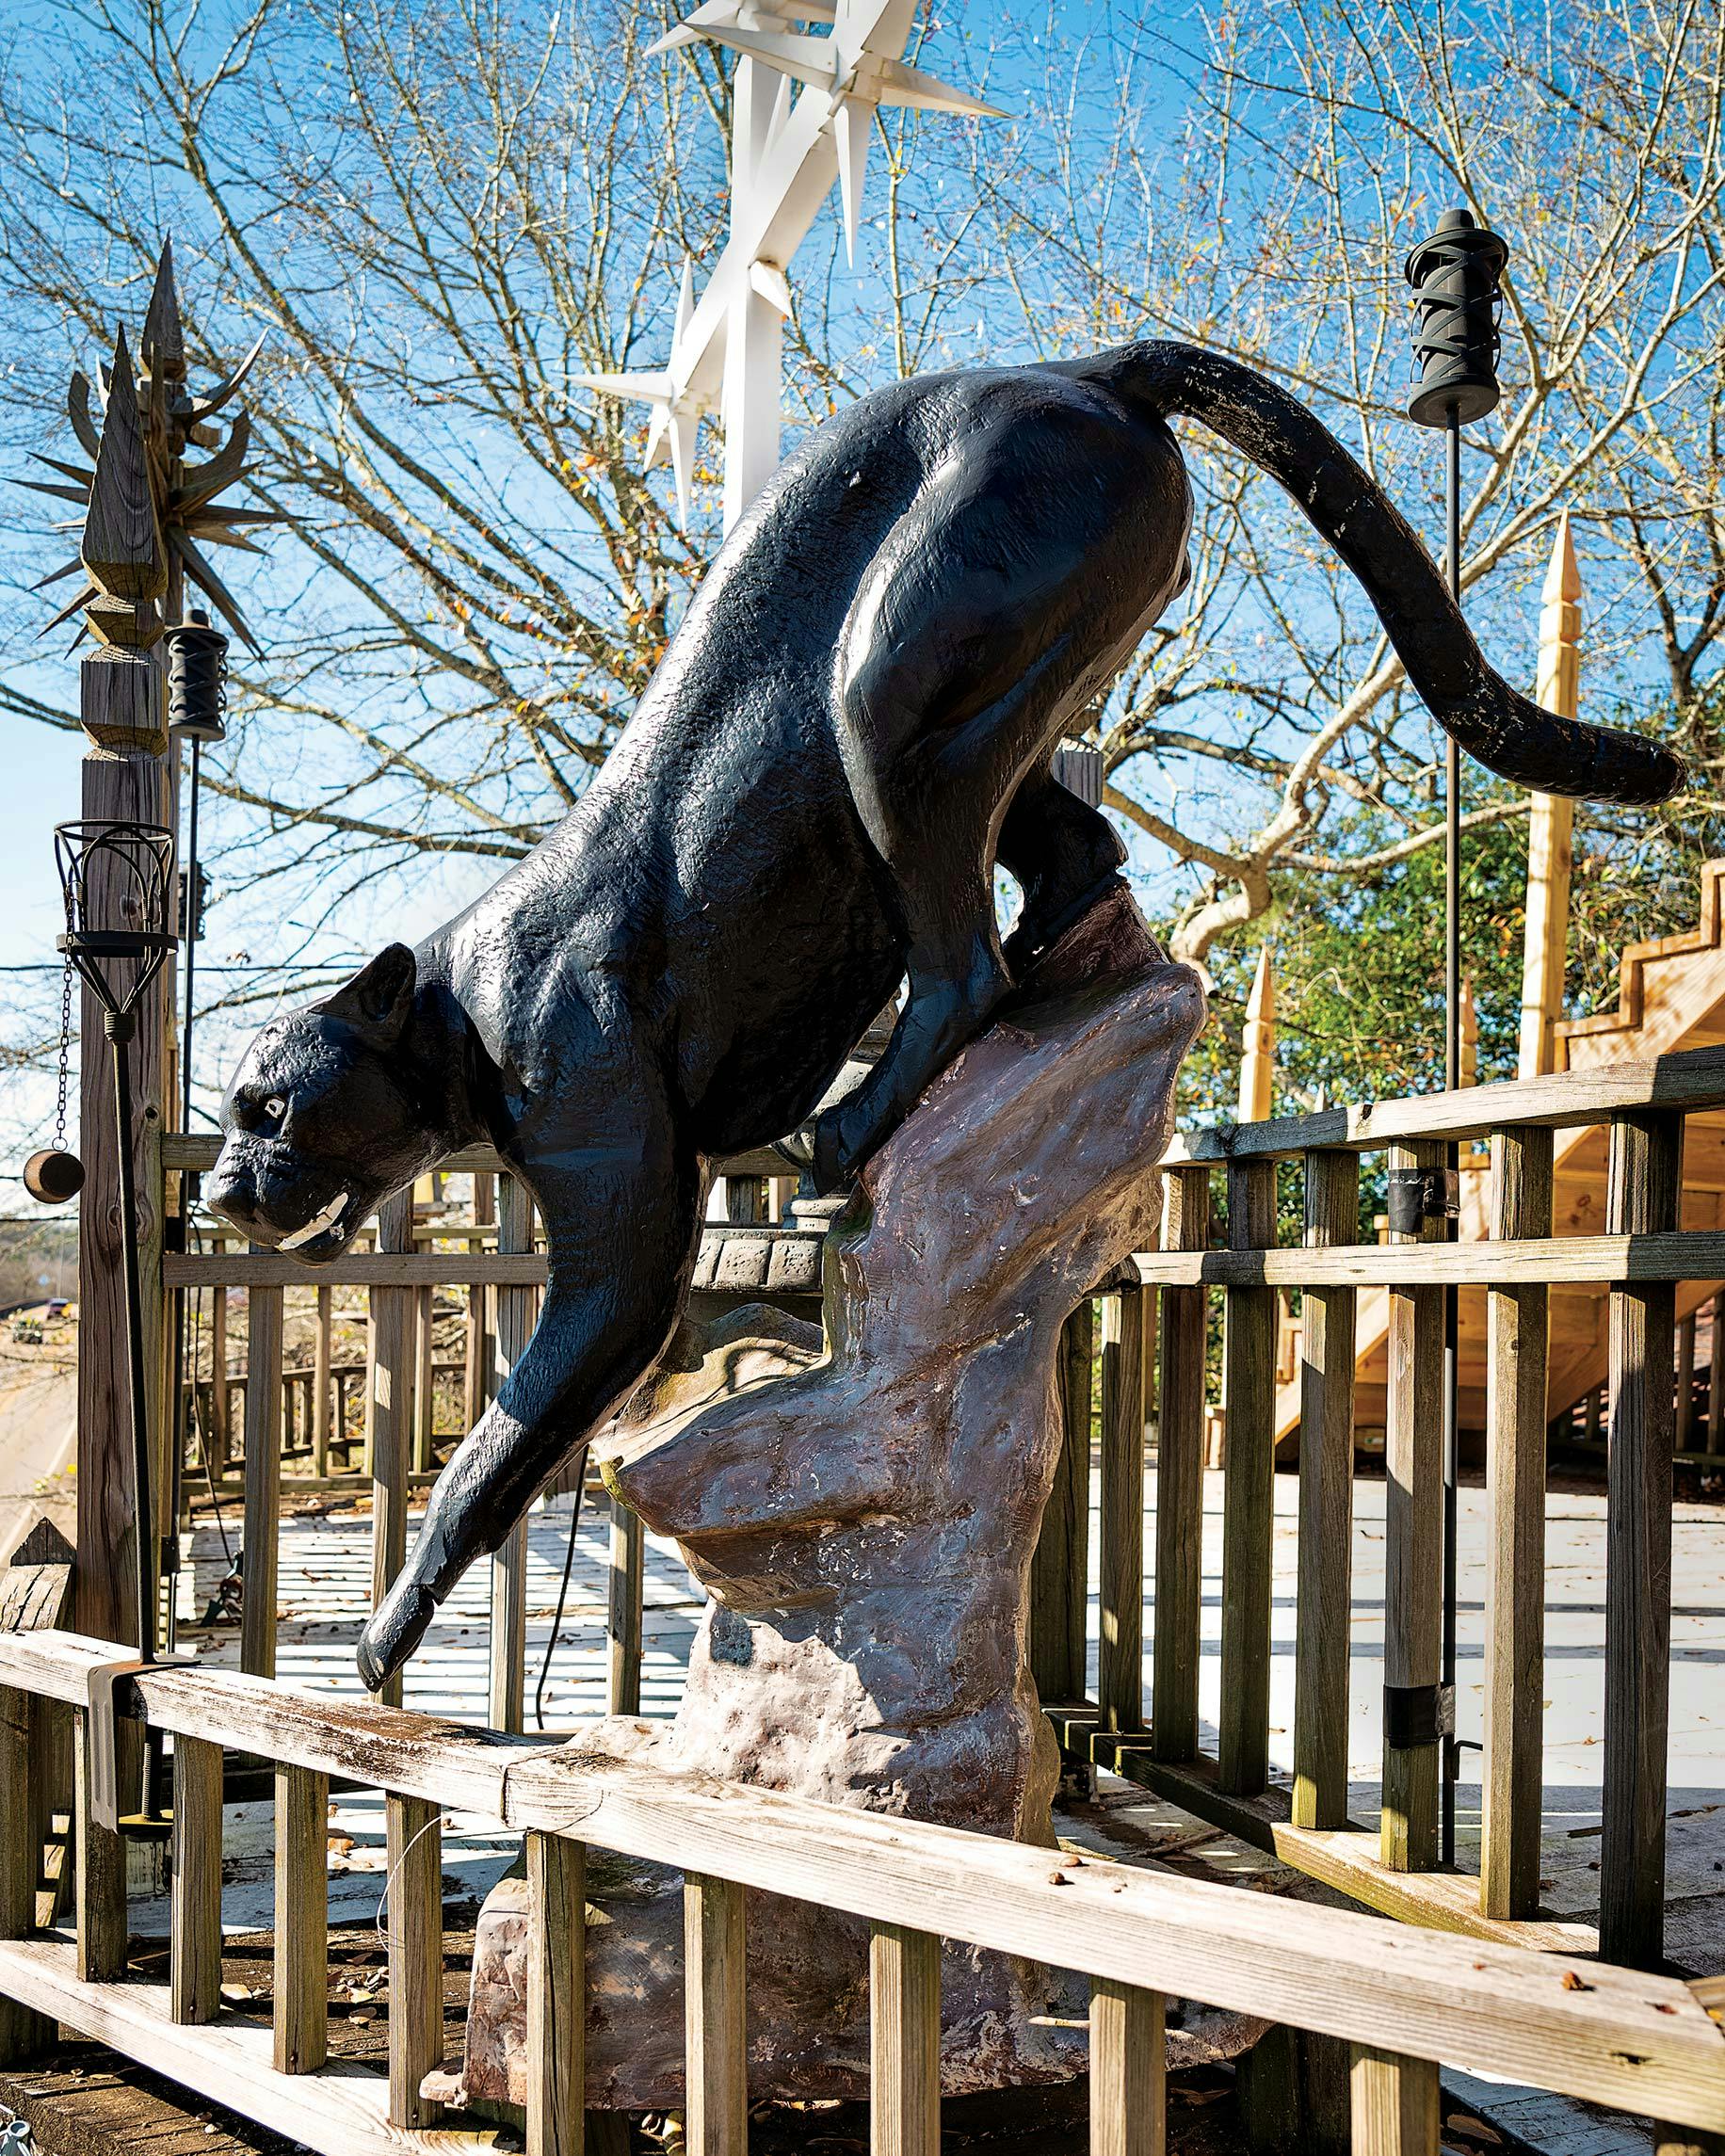 A panther perched on the deck.